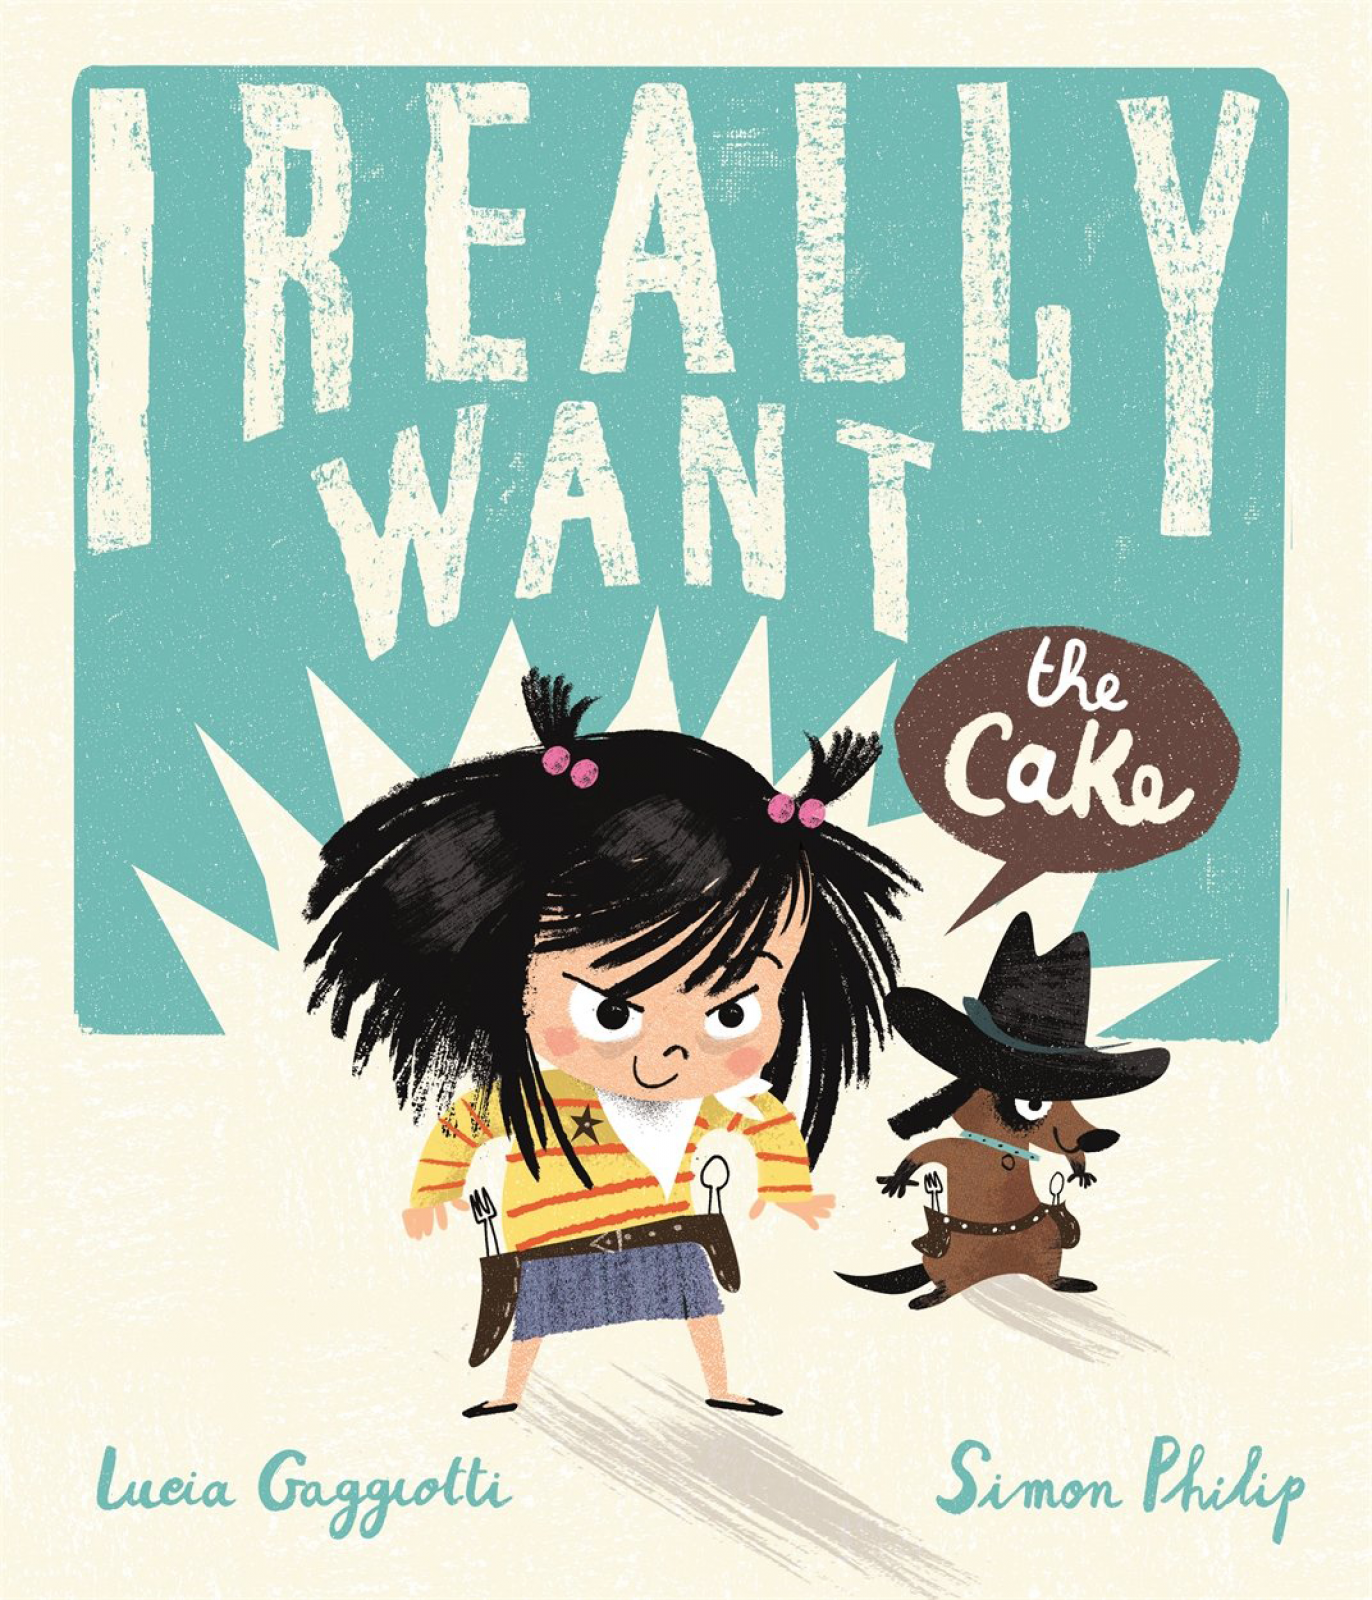 I Really Want The Cake By Simon Philip - Paperback Book